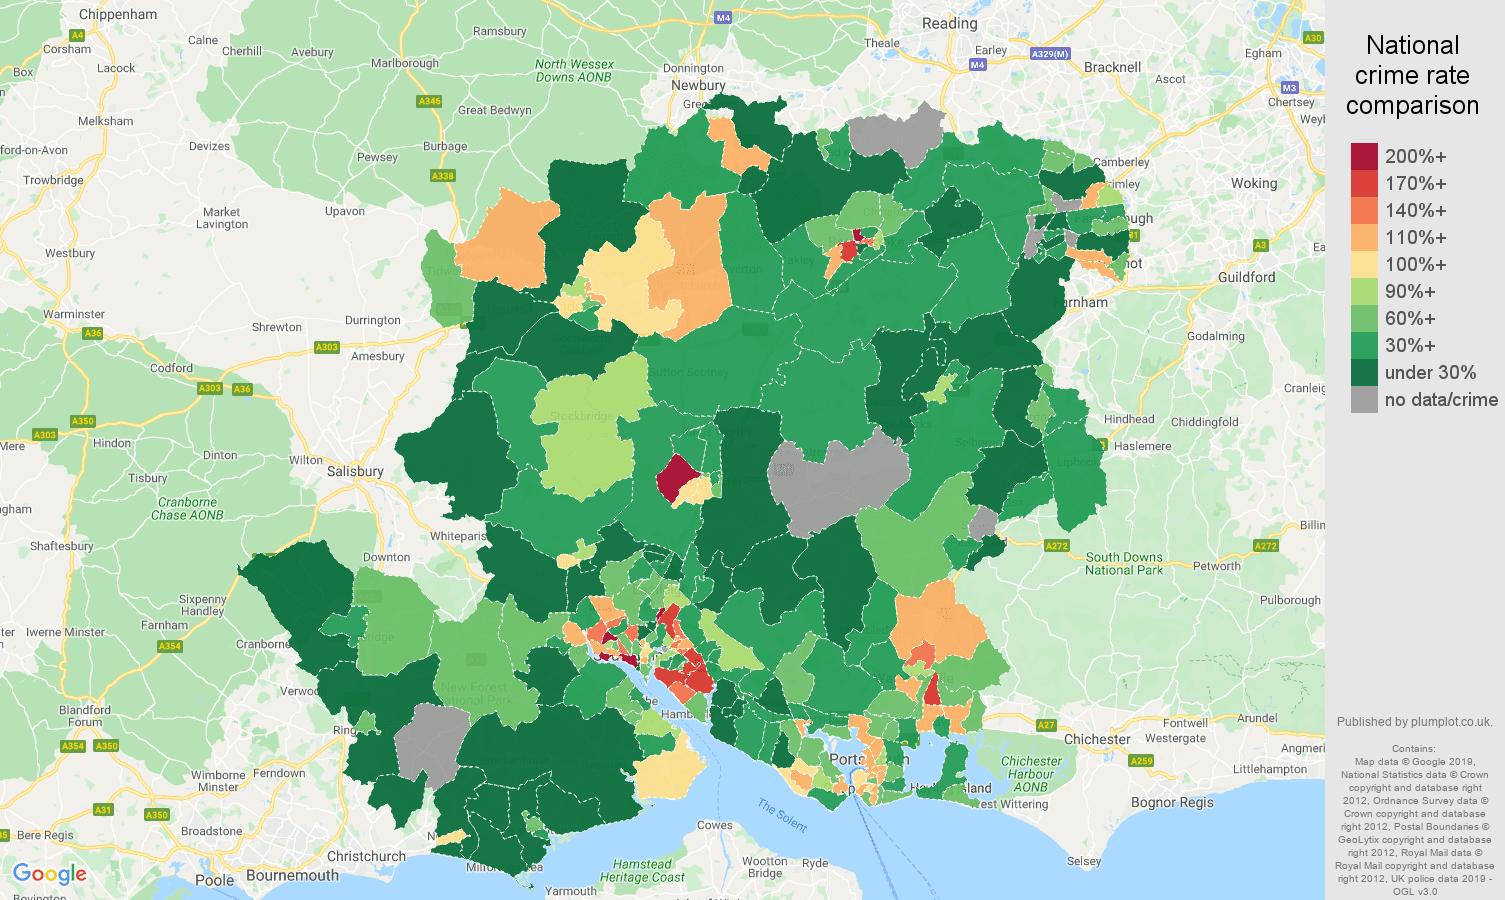 Hampshire other crime rate comparison map